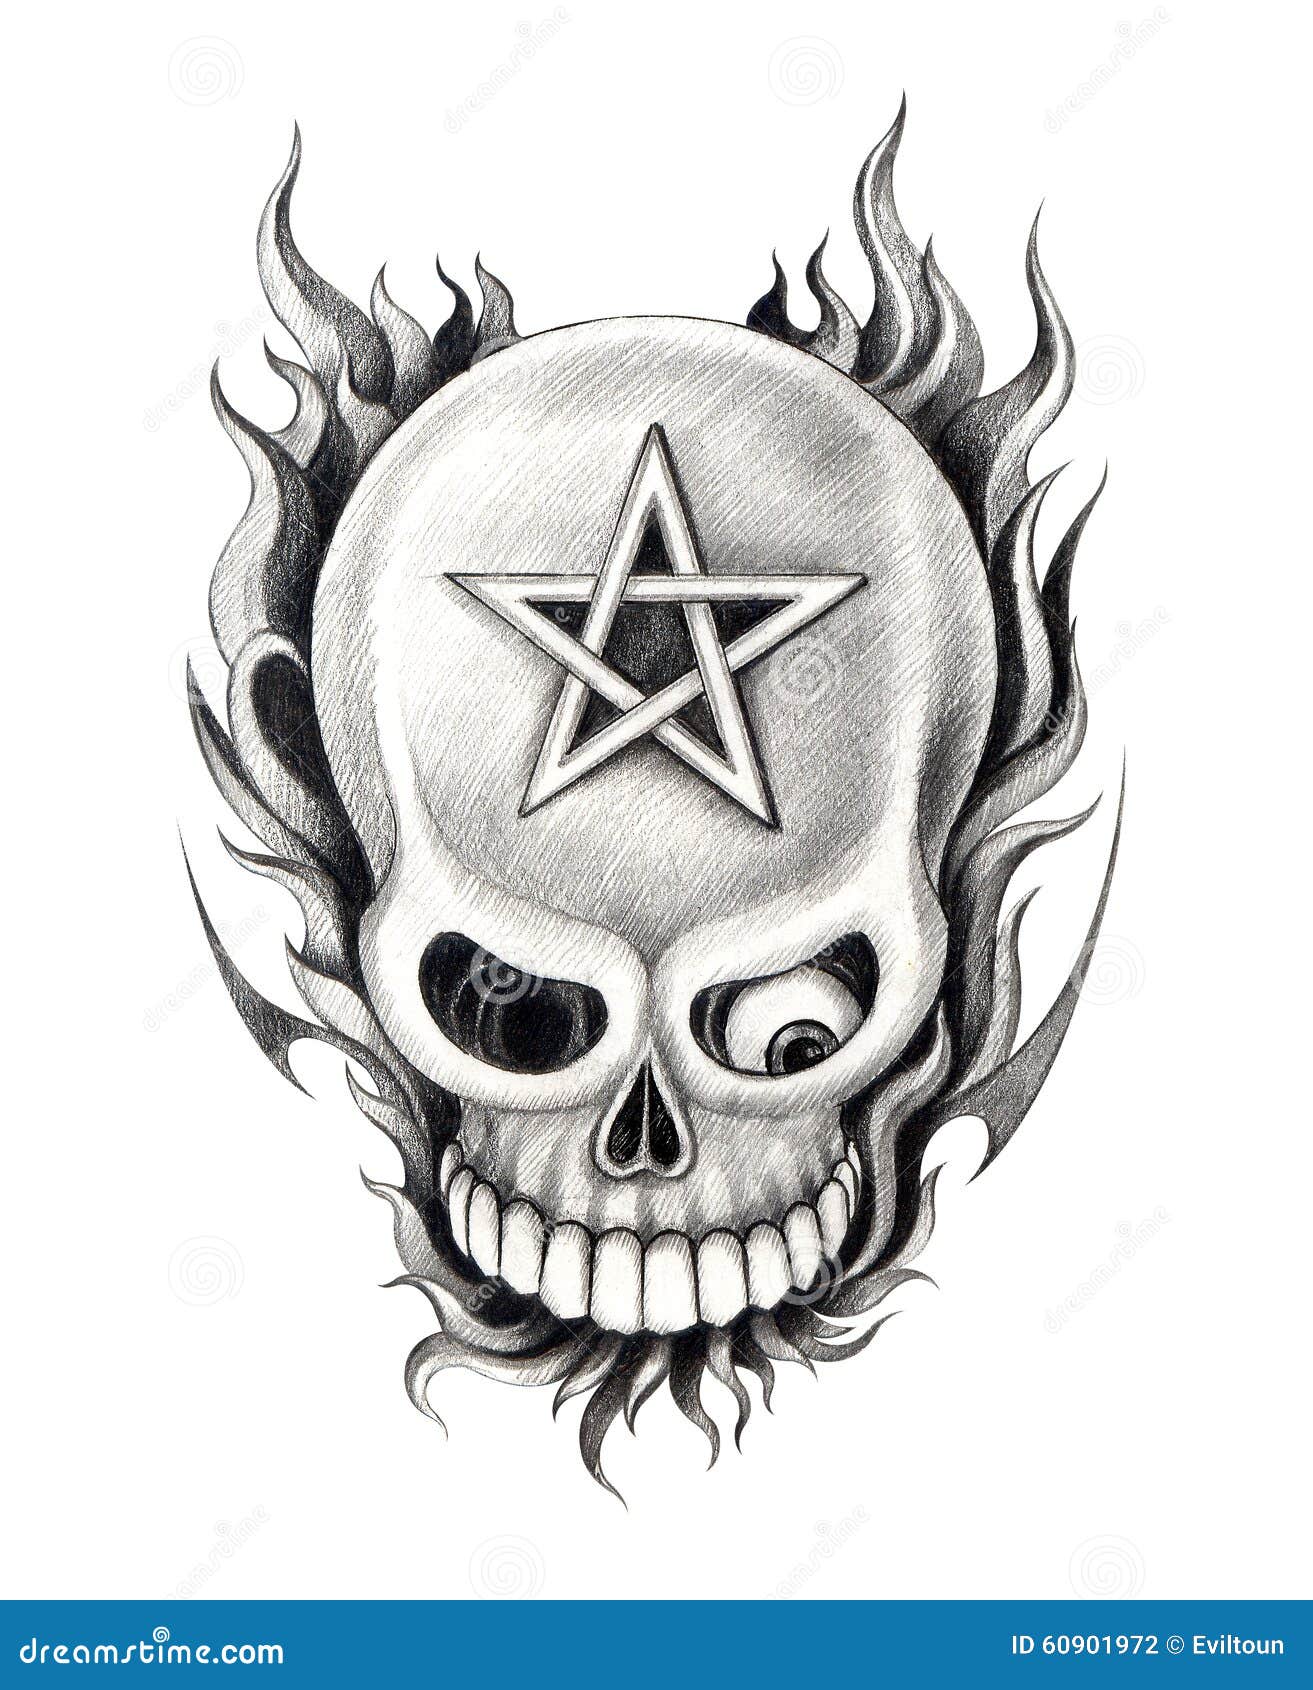 101 Amazing Pentagram Tattoo Ideas That Will Blow Your Mind! | Outsons |  Men's Fashion Tips And Style Guide For 2020 | Tato kecil, Tato, Seni